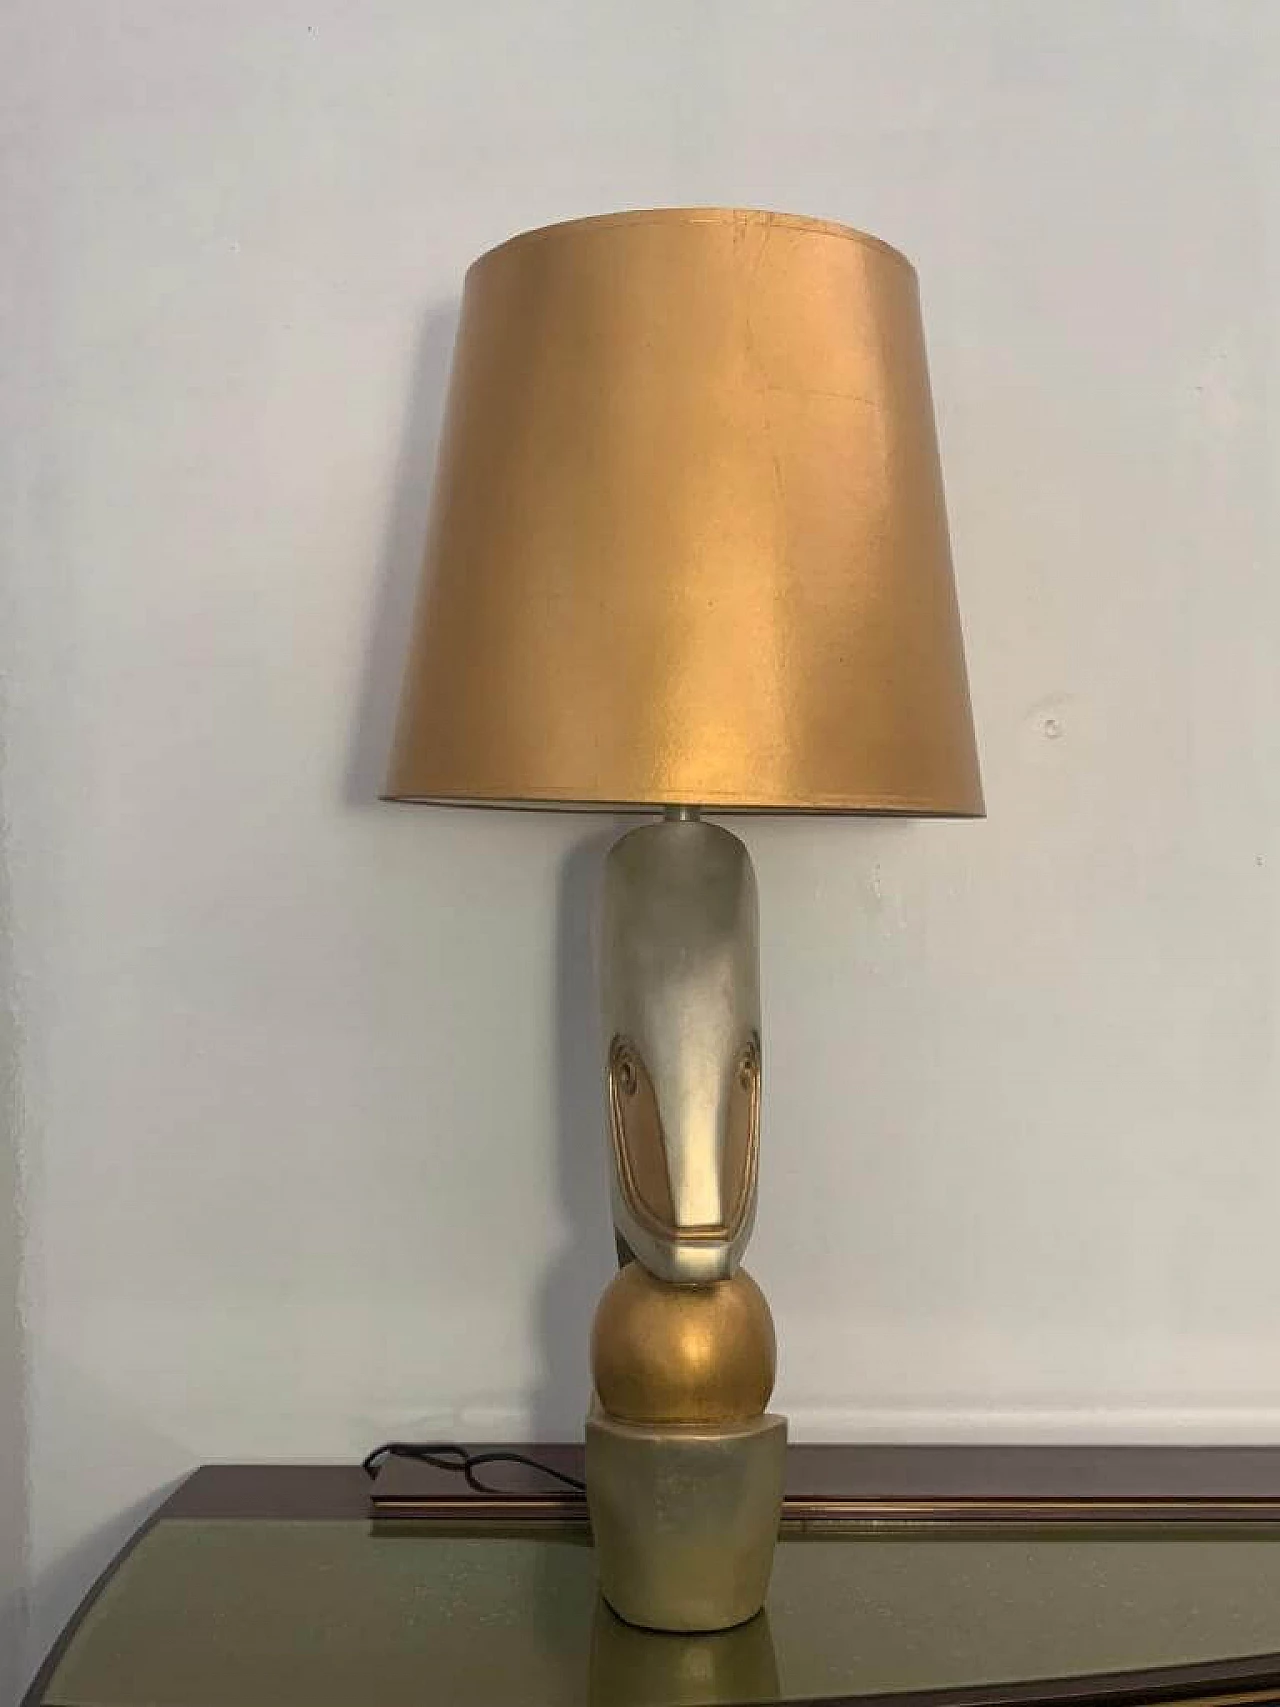 George table lamp by Leeazane for Lam Lee Group Dallas, 1990s 1197670